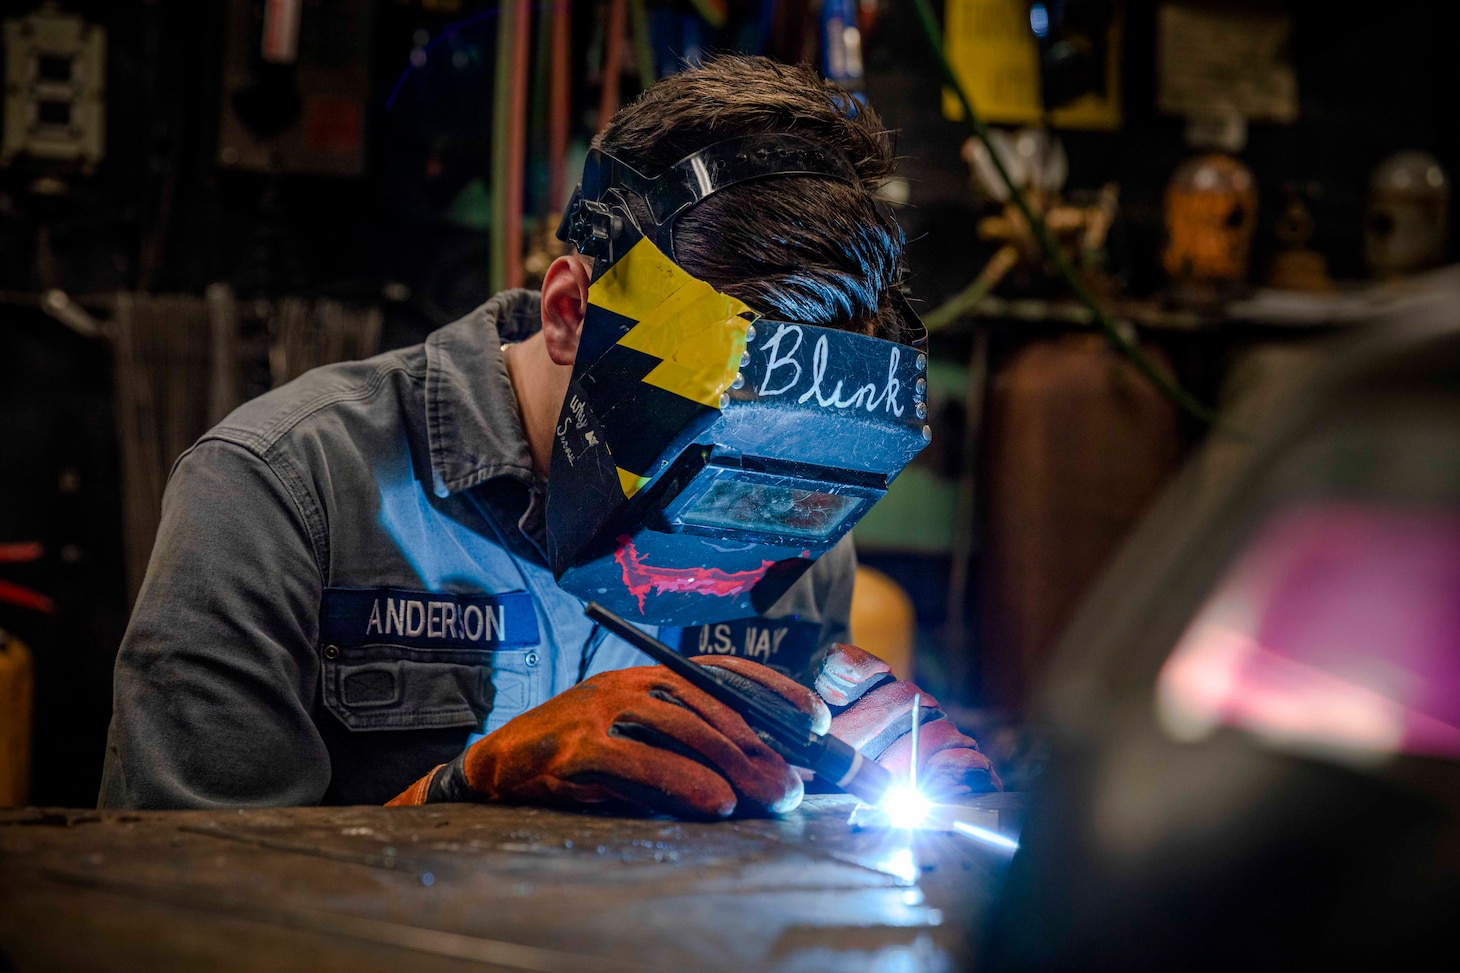 210617-N-IK871-2016 ATLANTIC OCEAN (June 17, 2021) Fireman Anderson practices tig welding using a tig torch aboard the Wasp-class amphibious assault ship USS Kearsarge (LHD 3) June 17, 2021. Anderson was the Commander Naval Surface Force Atlantic Surface Line Week welding competition winner by showcasing skills as a hull technician by welding a command representation piece using repair equipment on board Kearsarge. (U.S. Navy photo by Mass Communication Specialist Class 3rd Nick Boris)